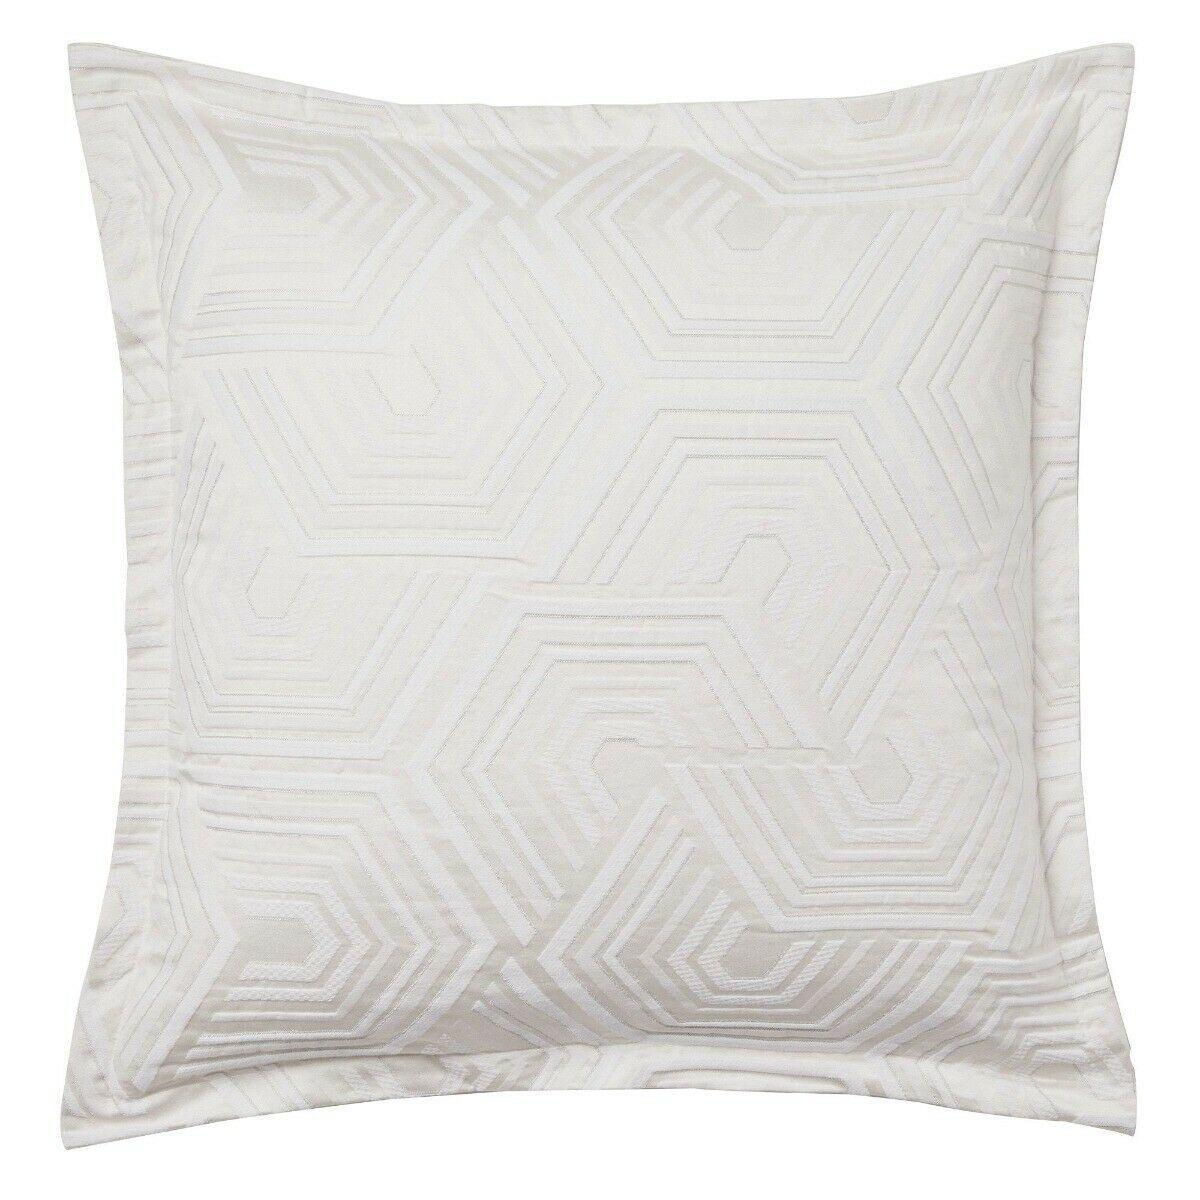 Private collection Bree Silver European Pillow Cover